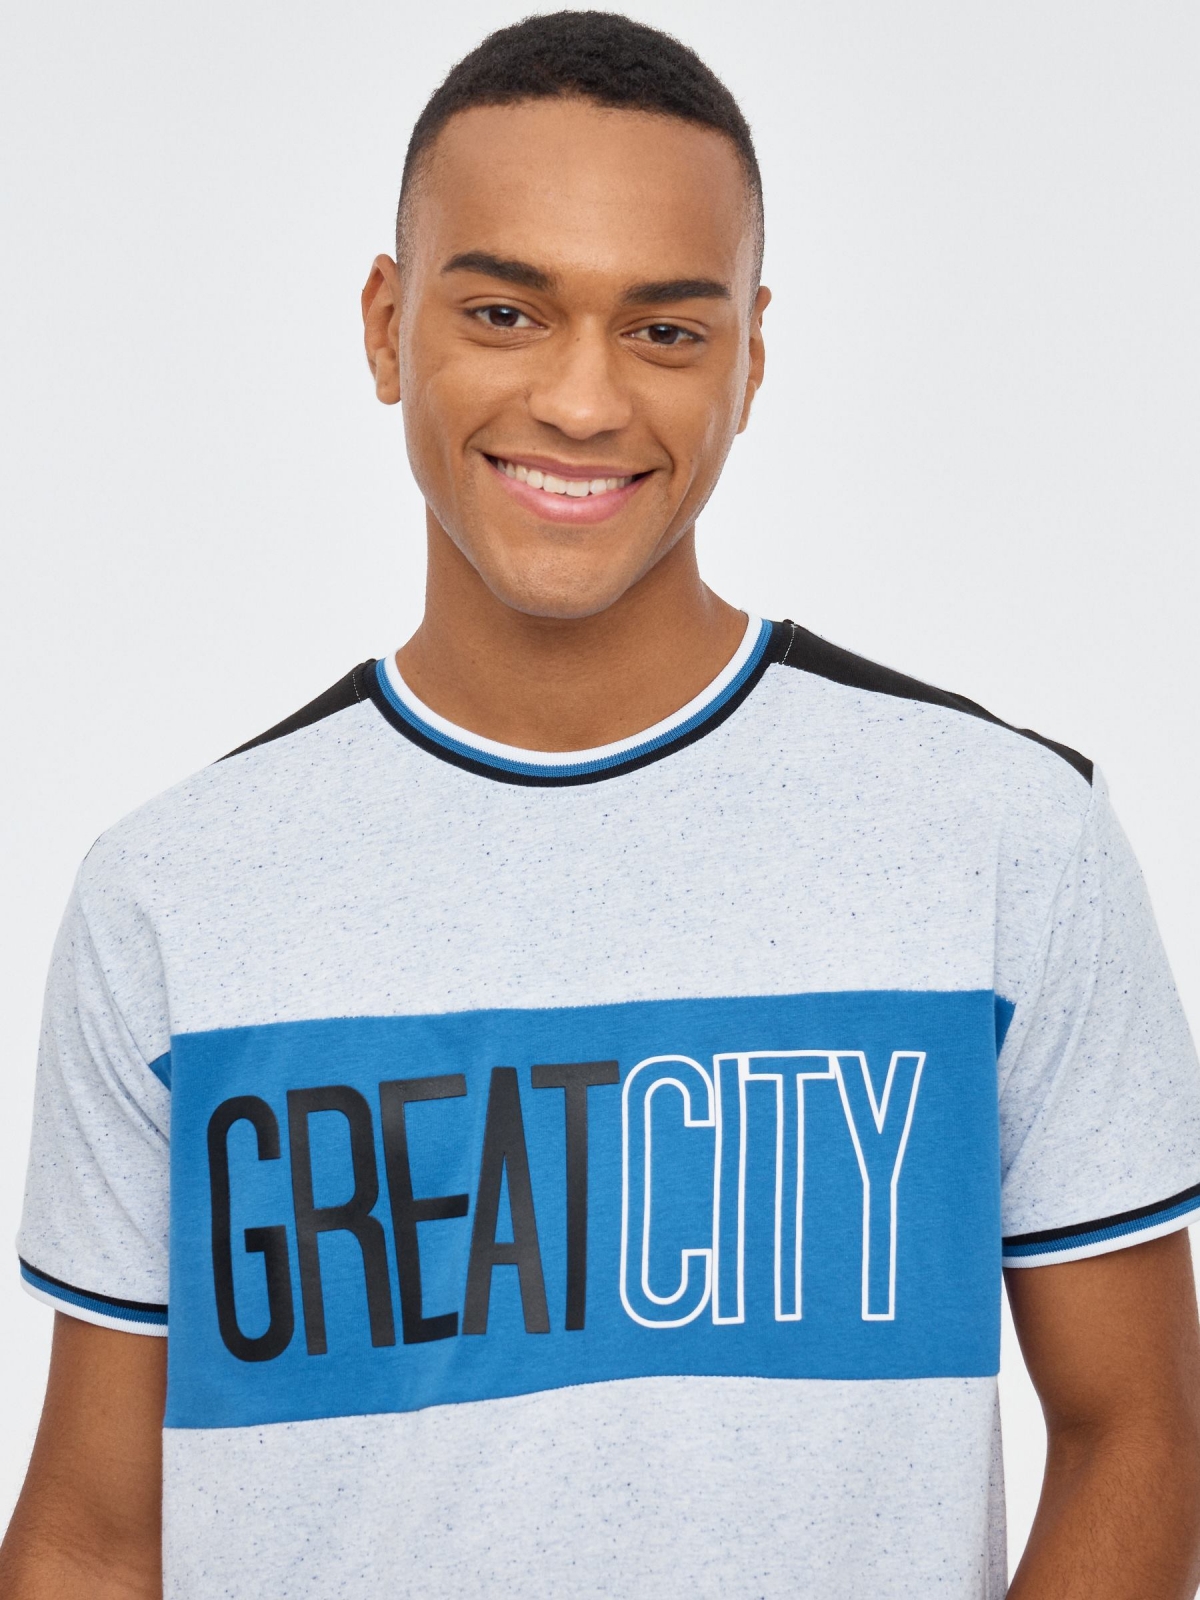 Greatcity T-shirt white detail view